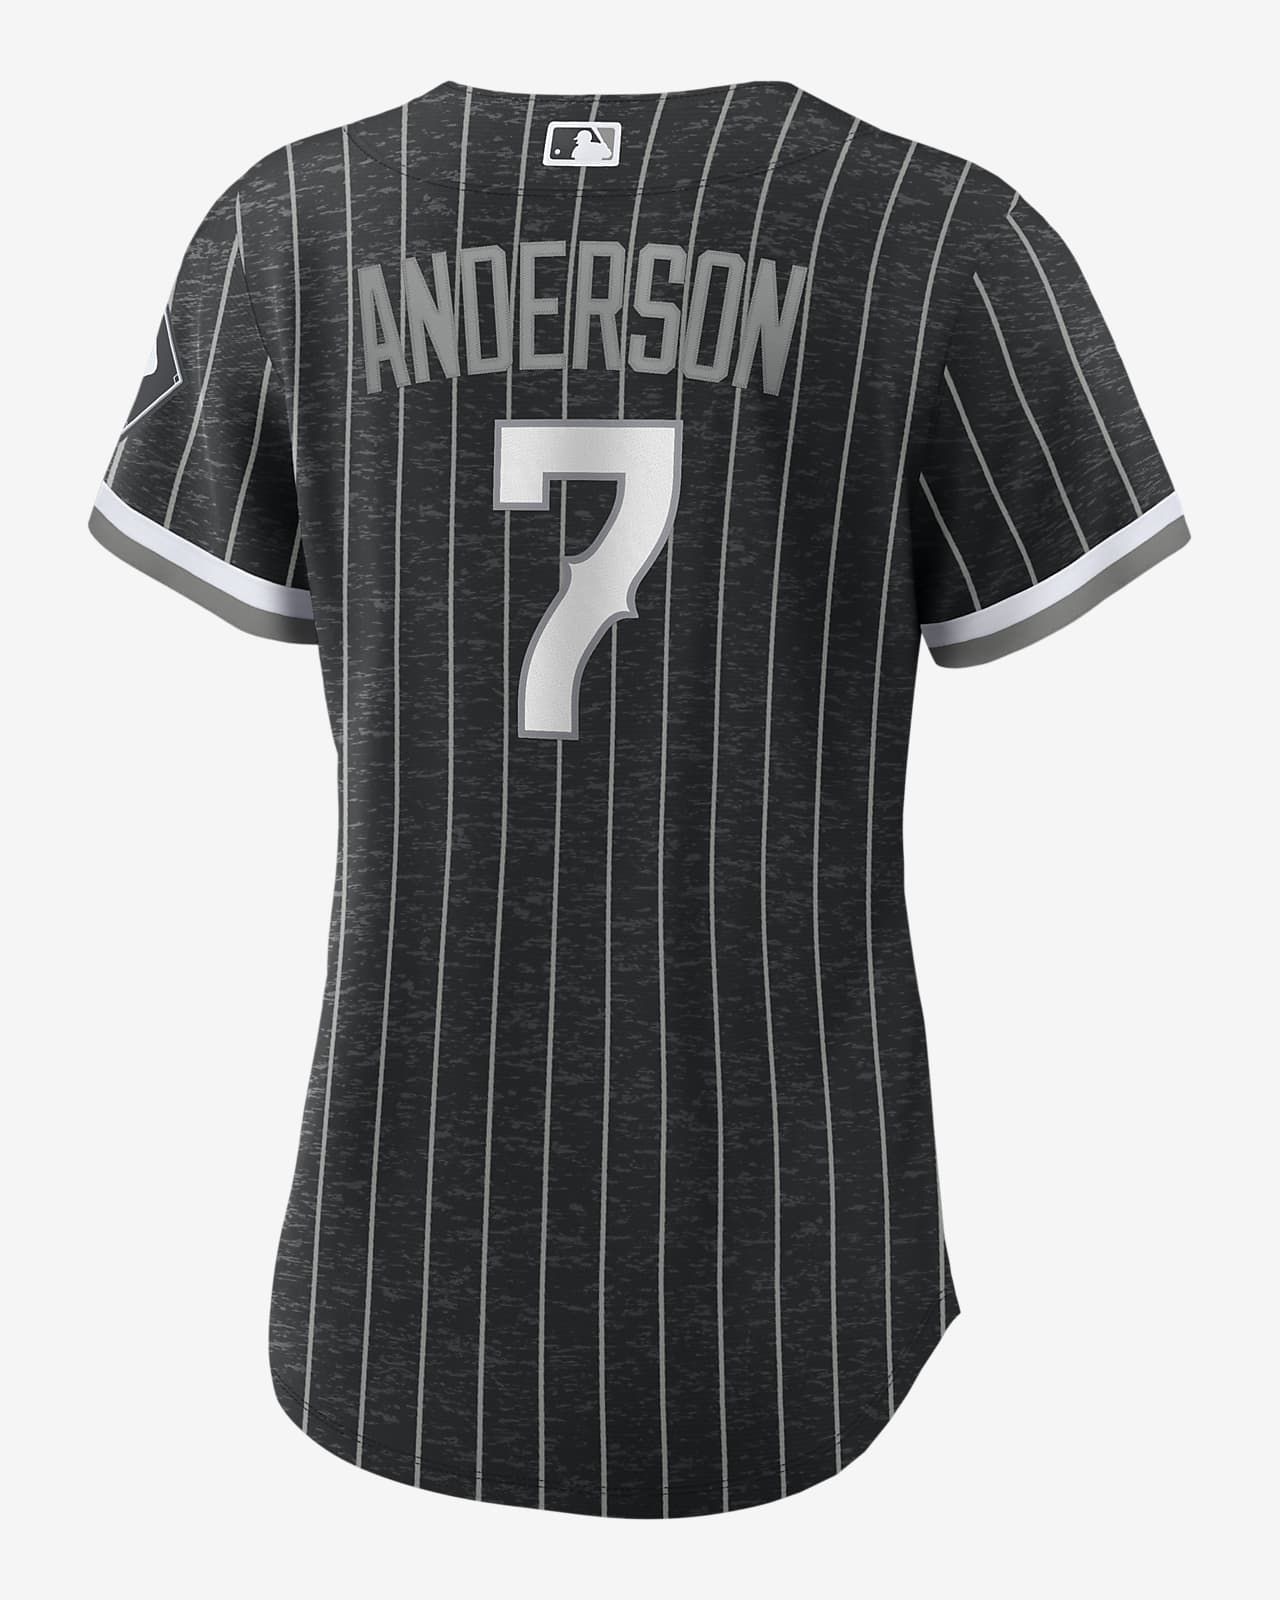 white sox connect jersey